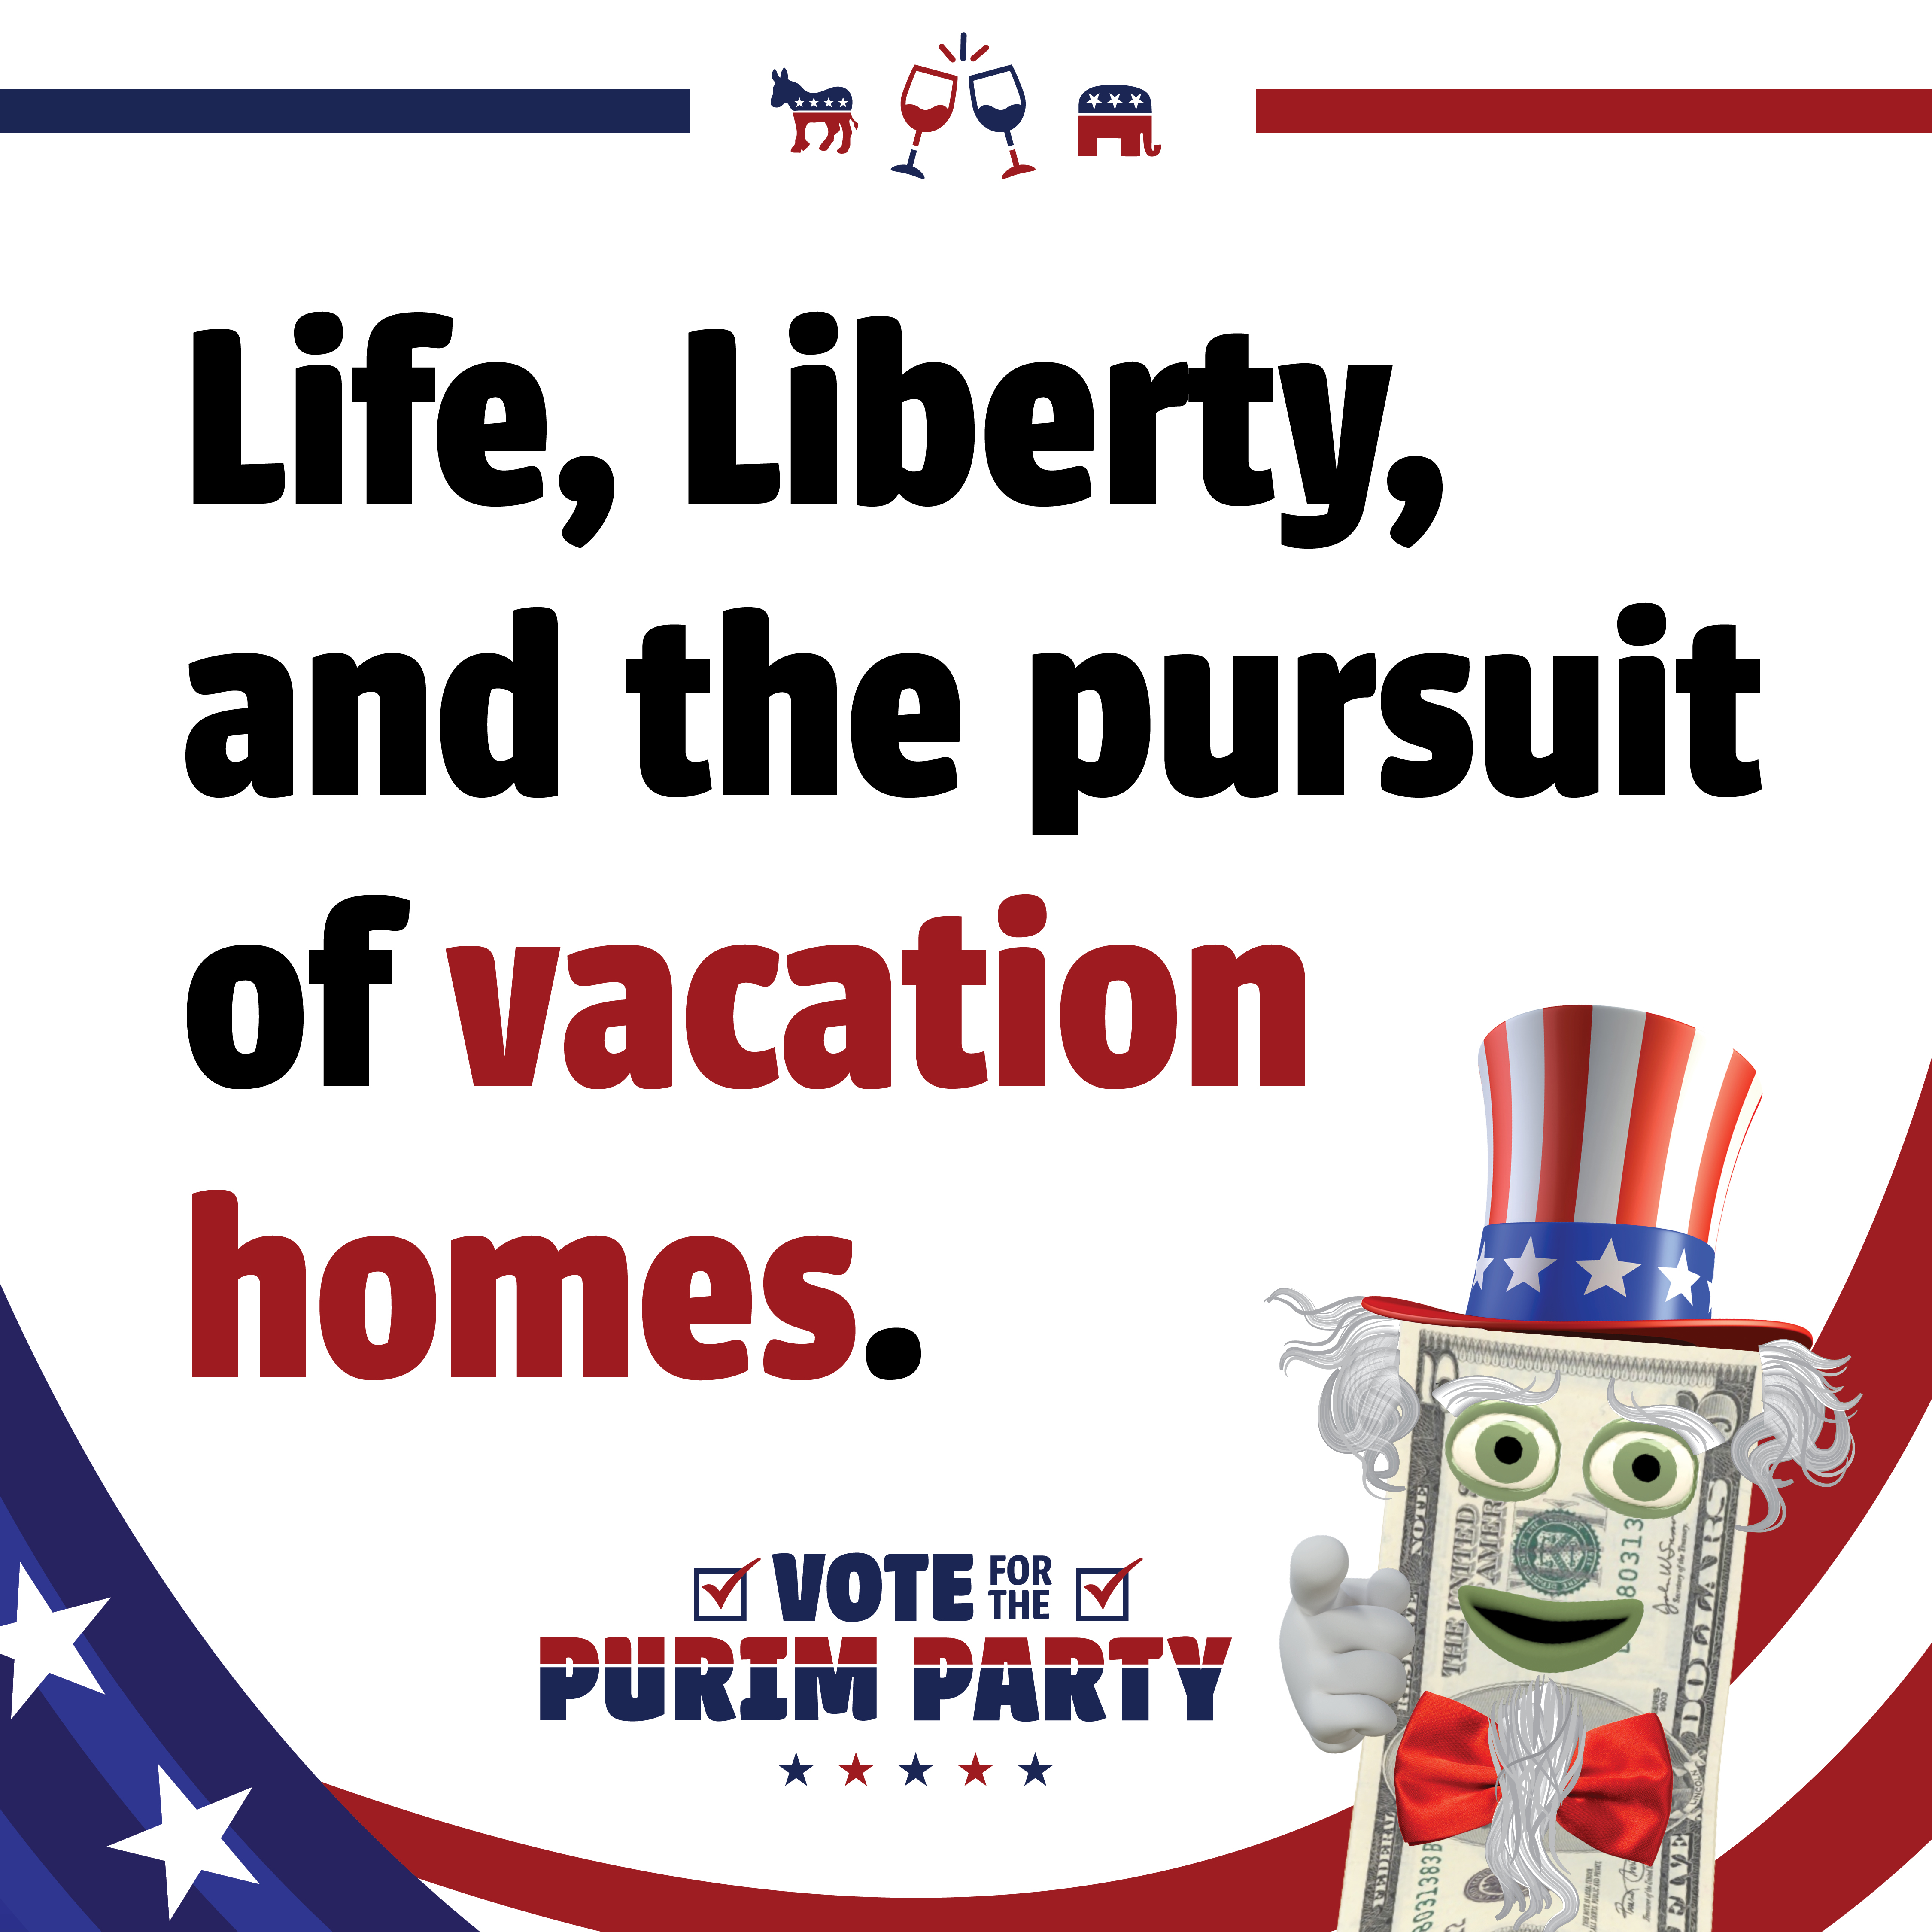 Life, liberty, and the pursuit of vacation homes.